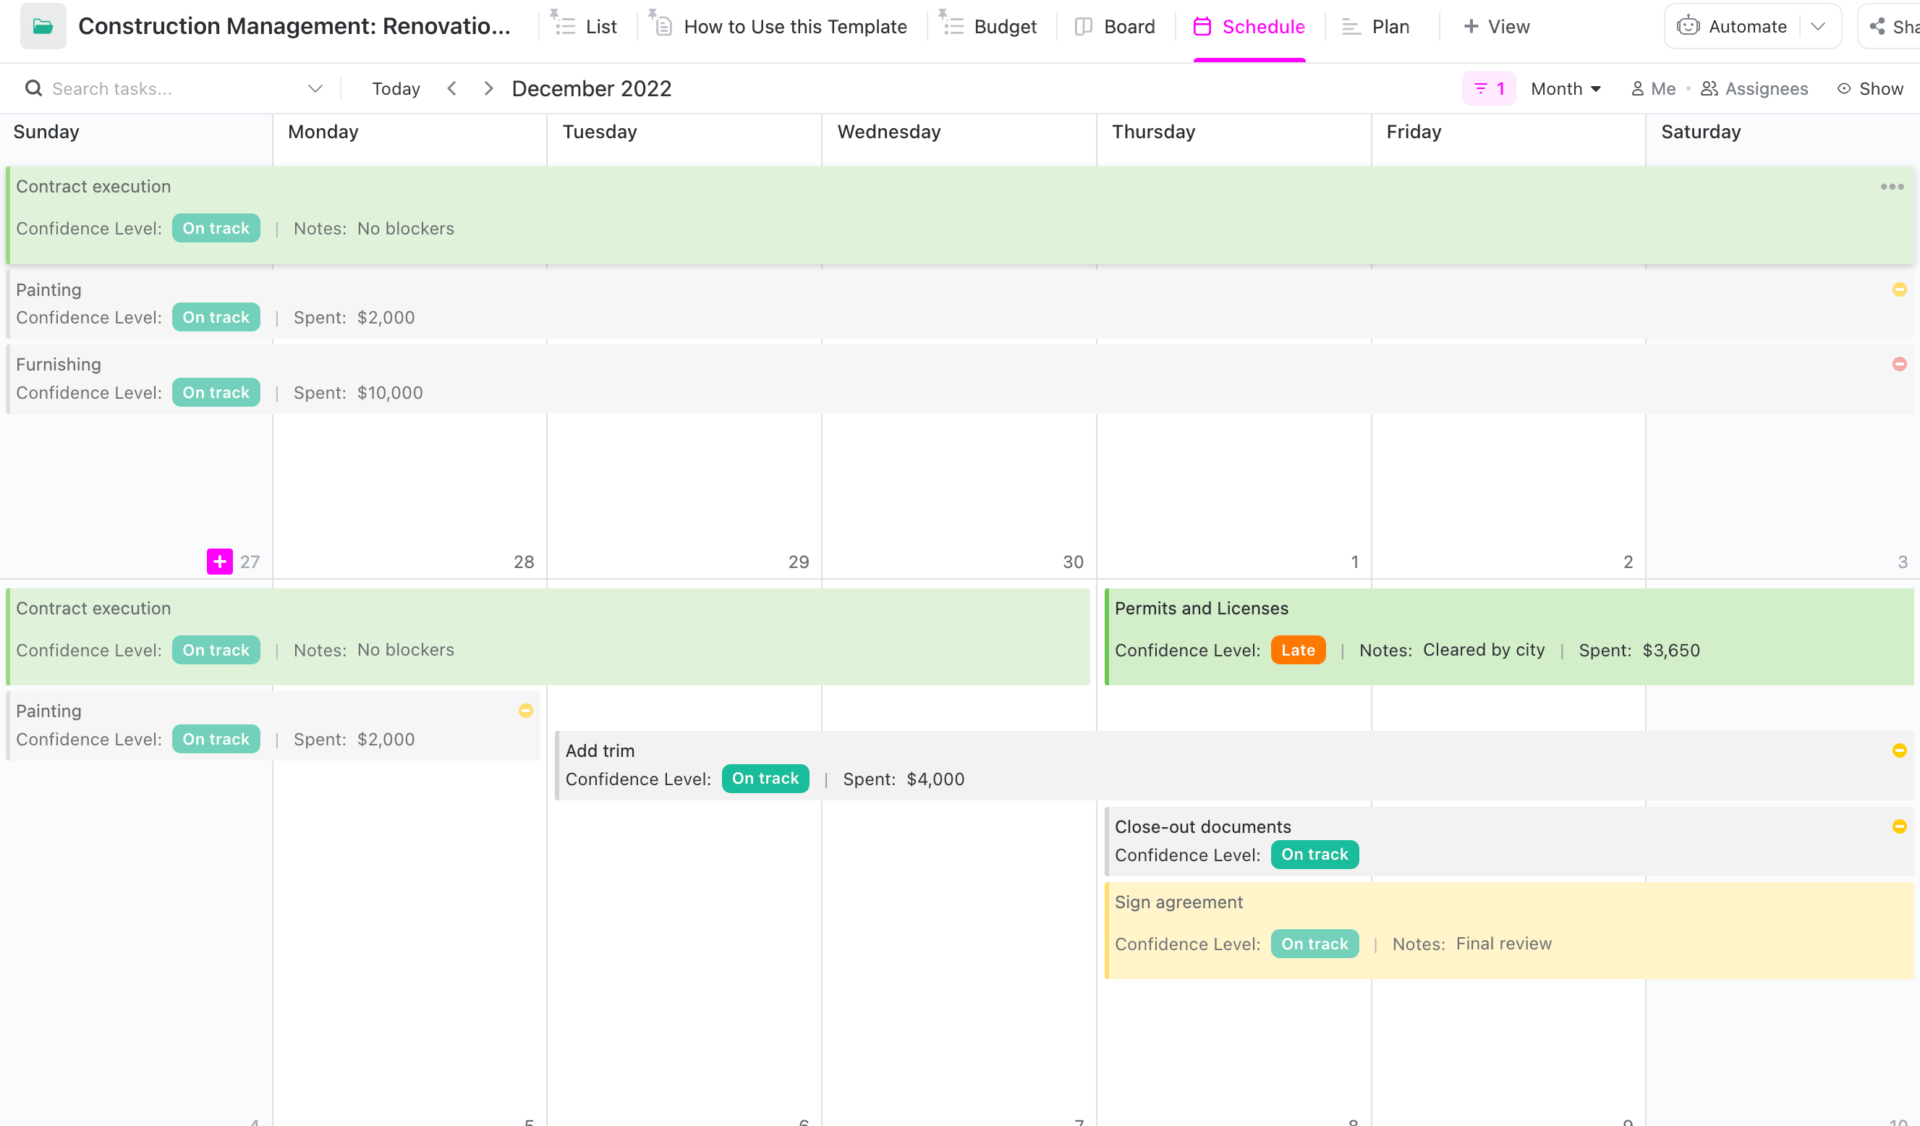 Additionally, you can use the ClickUp Construction Management Template to set and align project schedules in a calendar view